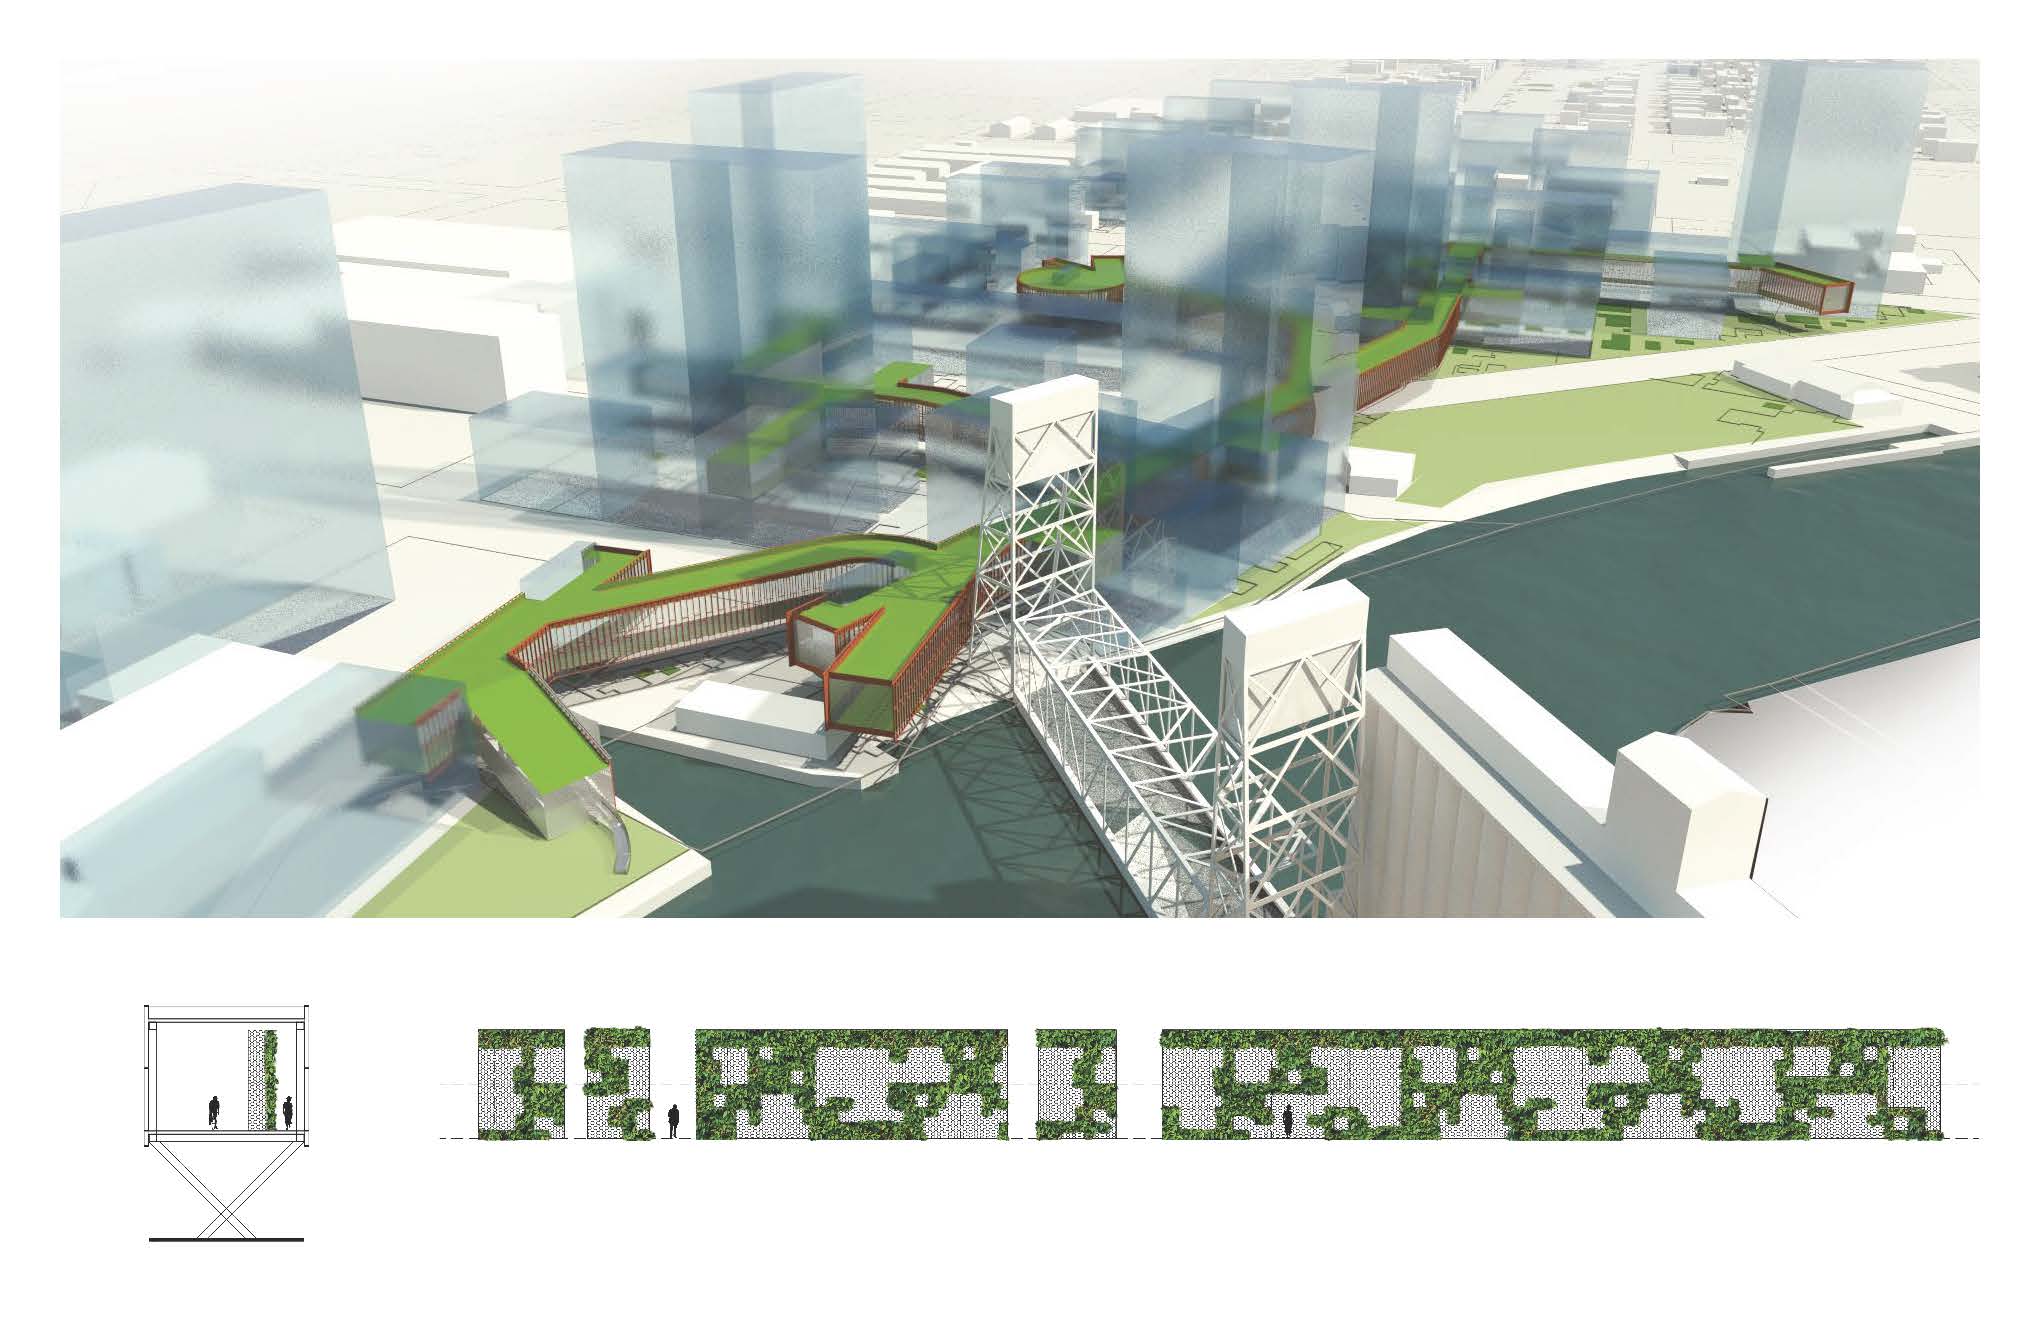 Buffalo DL&W Corridor Competition Entry – Elevating Landscapes in Movement